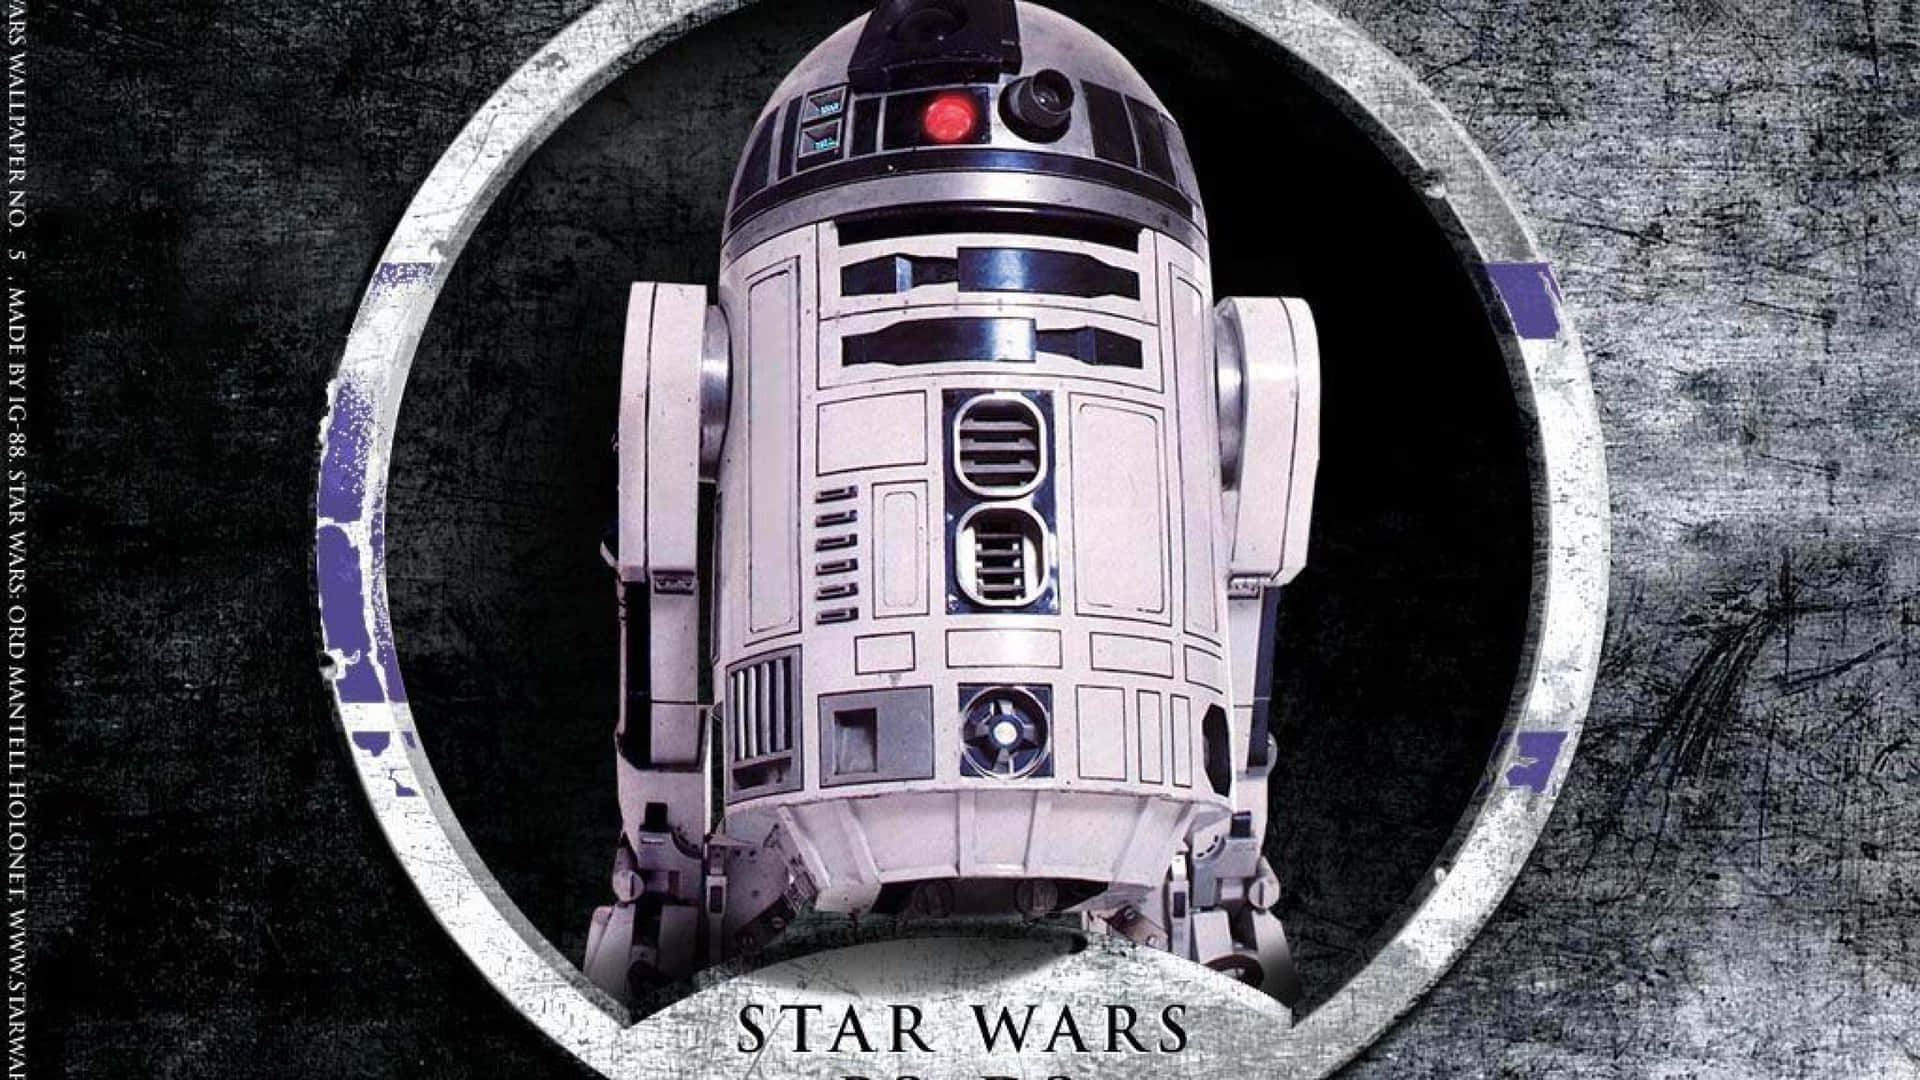 A fan-favorite character, R2-D2, stands by Wallpaper